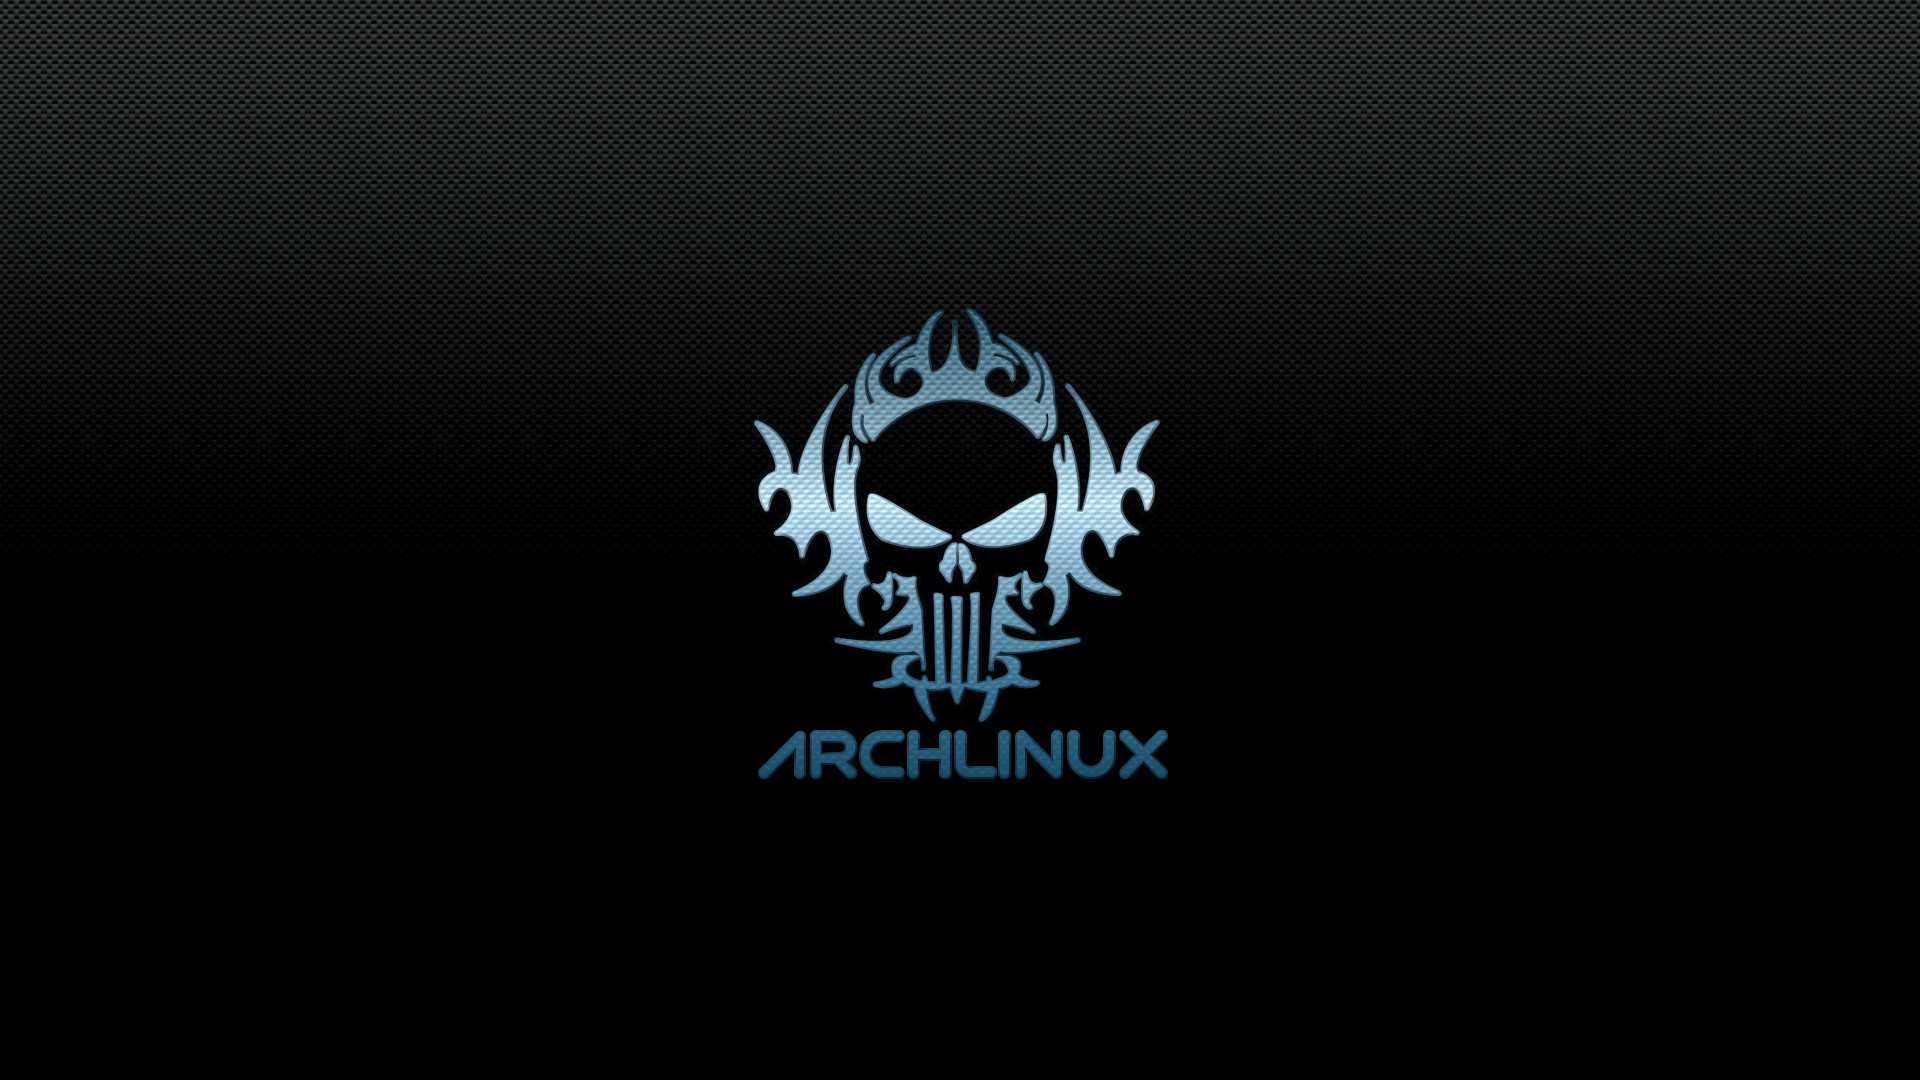 Arch Linux Black OS Wallpaper Free Download Wallpaper with 1920x1080